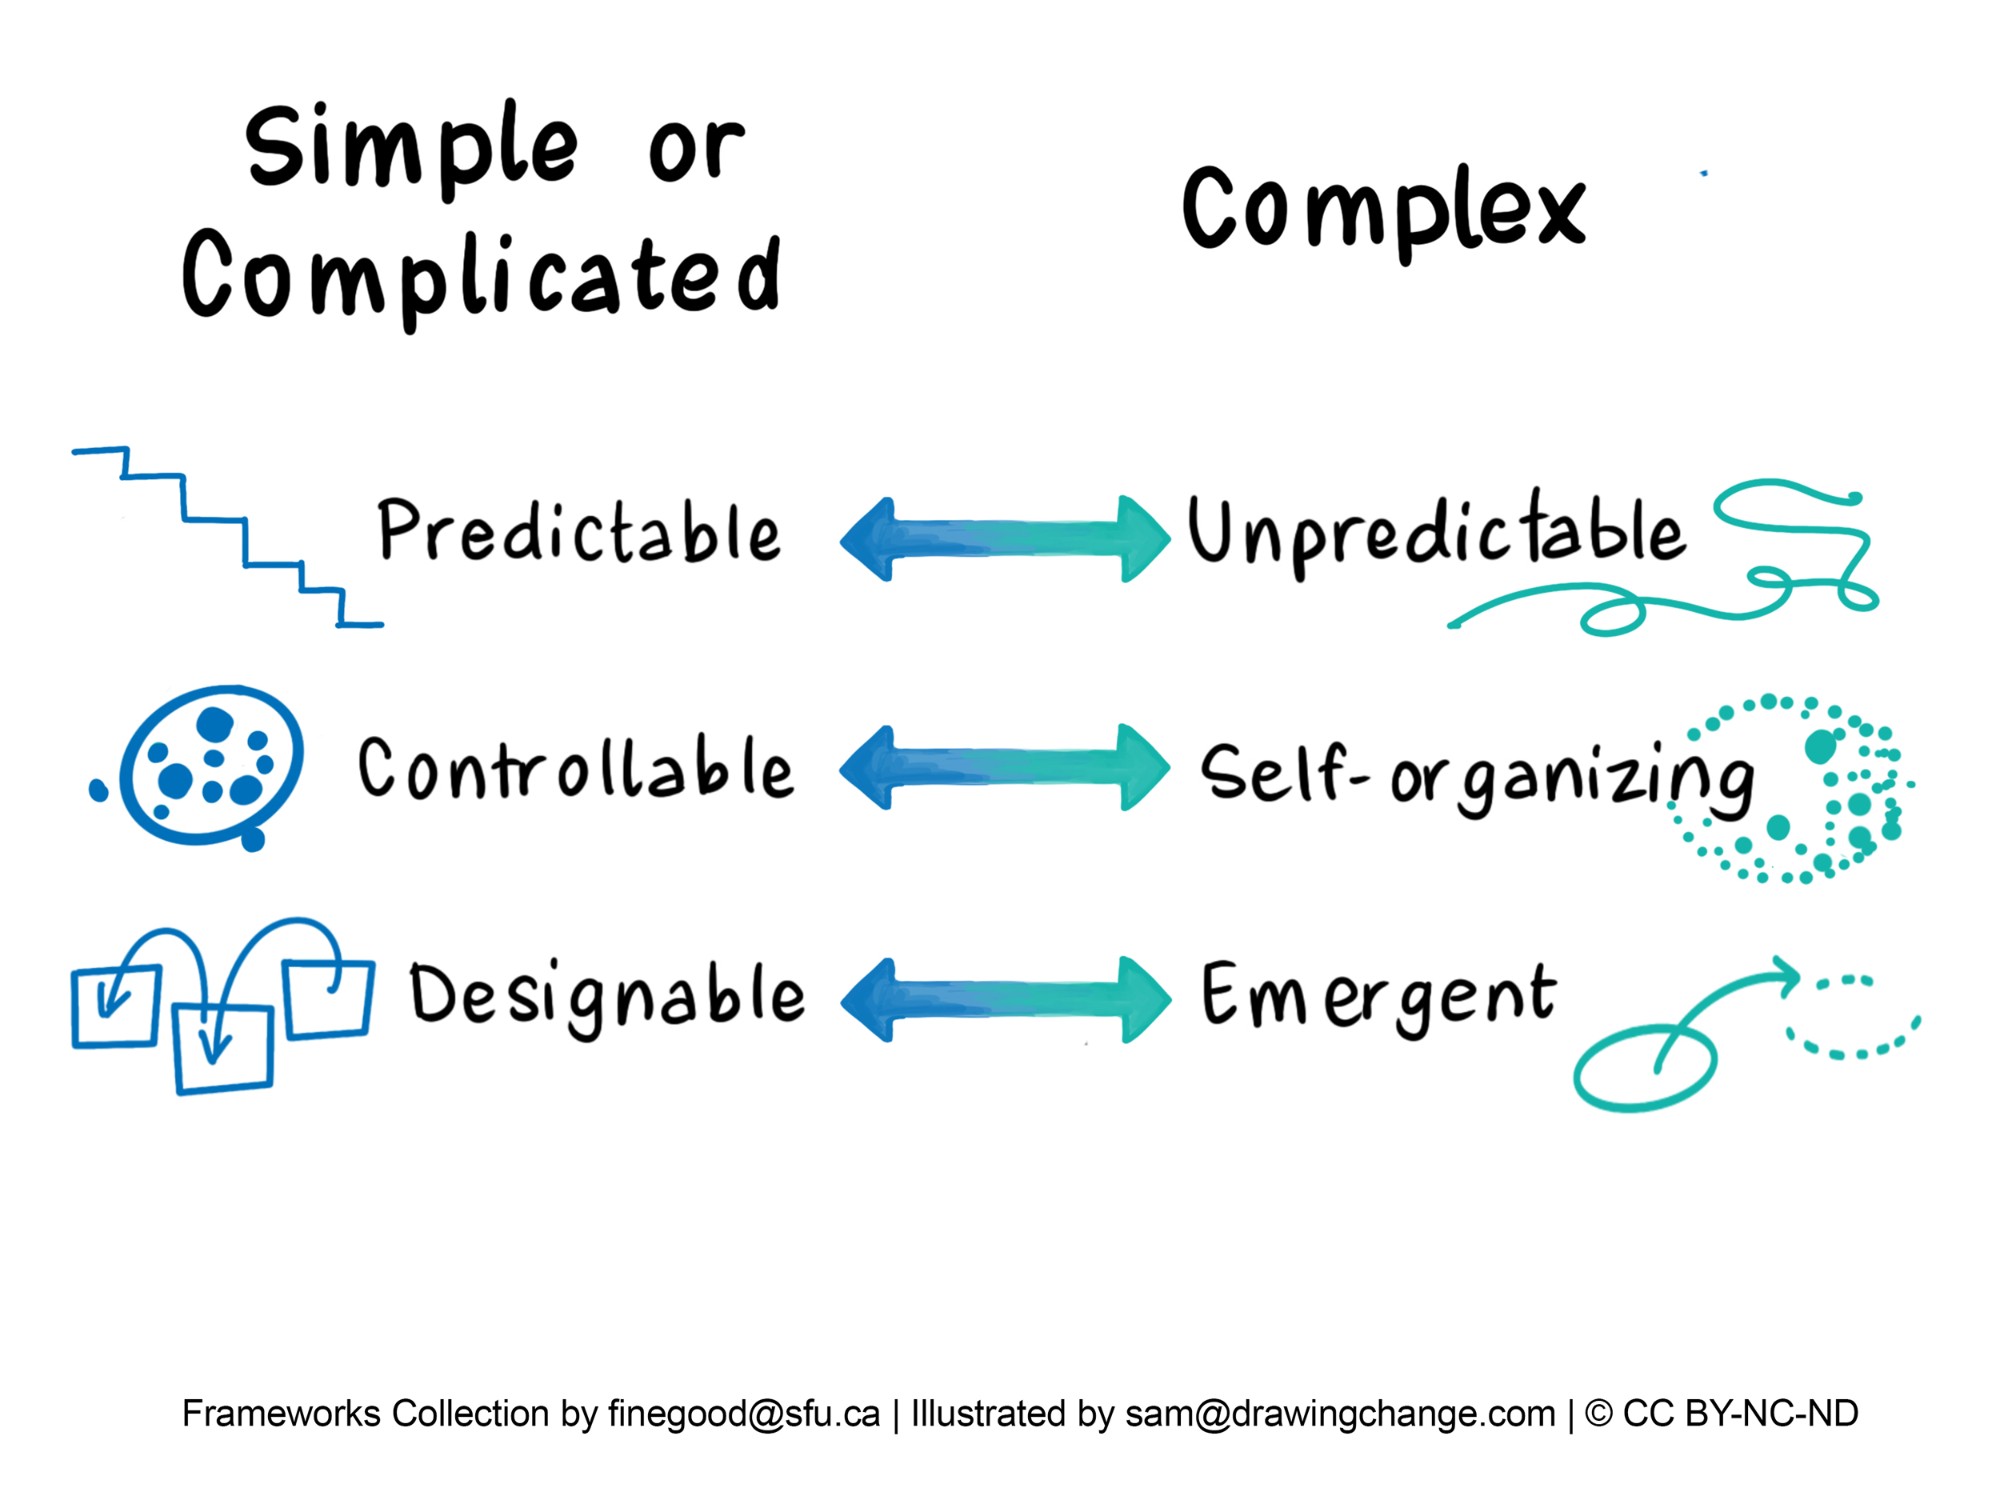 The image presents a comparison between characteristics associated with "Simple or Complicated" systems and those associated with "Complex" systems, using a series of dual-sided arrows to indicate a spectrum or shift from one end to the other.   On the left side, under "Simple or Complicated," three phrases are shown with corresponding symbols: "Predictable" with a step-like arrow pointing downward, "Controllable" with a film reel, and "Designable" with puzzle pieces fitting together.  On the right side, under "Complex," the contrasting phrases are: "Unpredictable" with a squiggly line indicating variability, "Self-organizing" with dots arranged in a circular, dispersed pattern, and "Emergent" with an arrow looping back on itself to form a circular pattern.  The blue arrows bridging the two columns suggest a spectrum between the simple/complicated and complex attributes, illustrating how systems can move from being predictable, controllable, and designable to becoming unpredictable, self-organizing, and emergent.